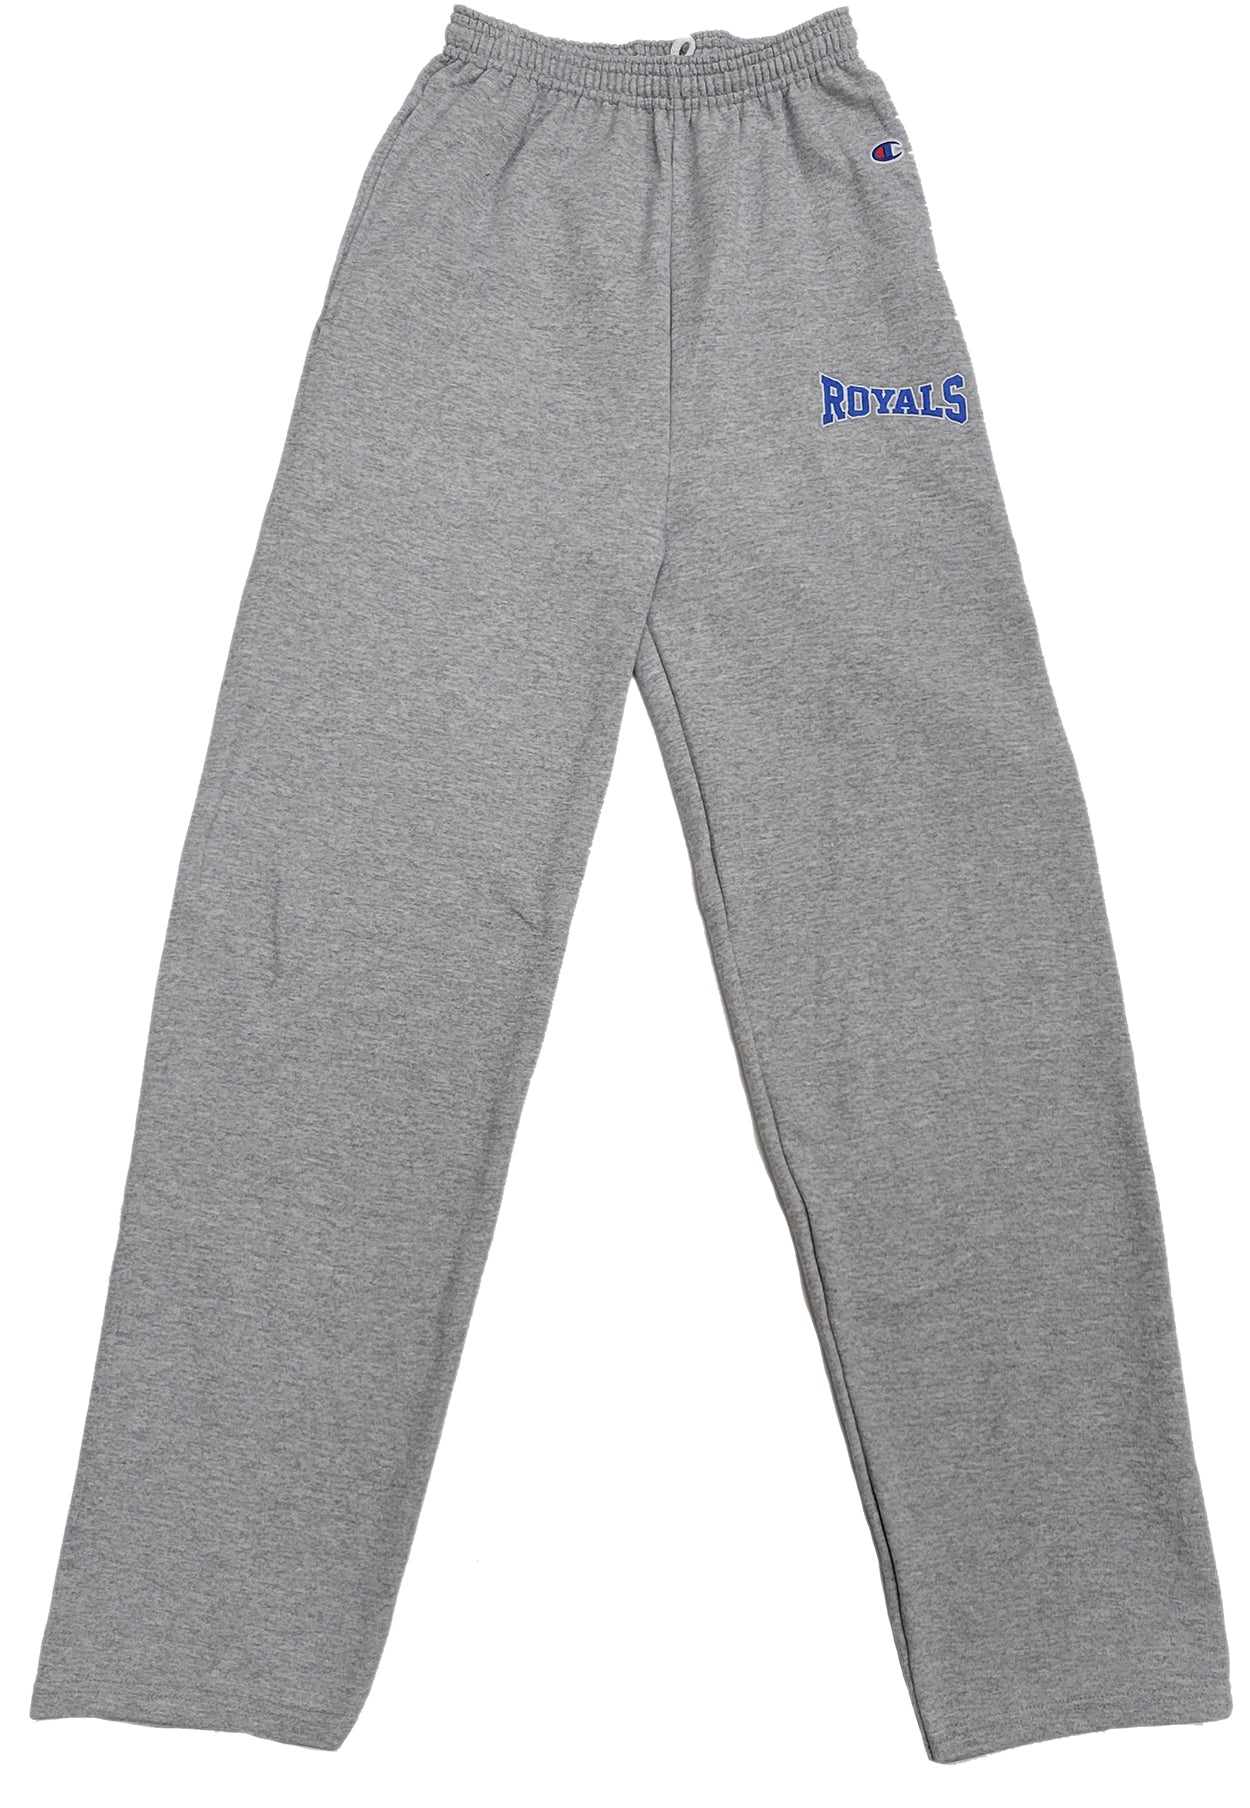 Royals Champion Open Bottom Sweatpants with Pockets-CLEARANCE-Pants-Advanced Sportswear